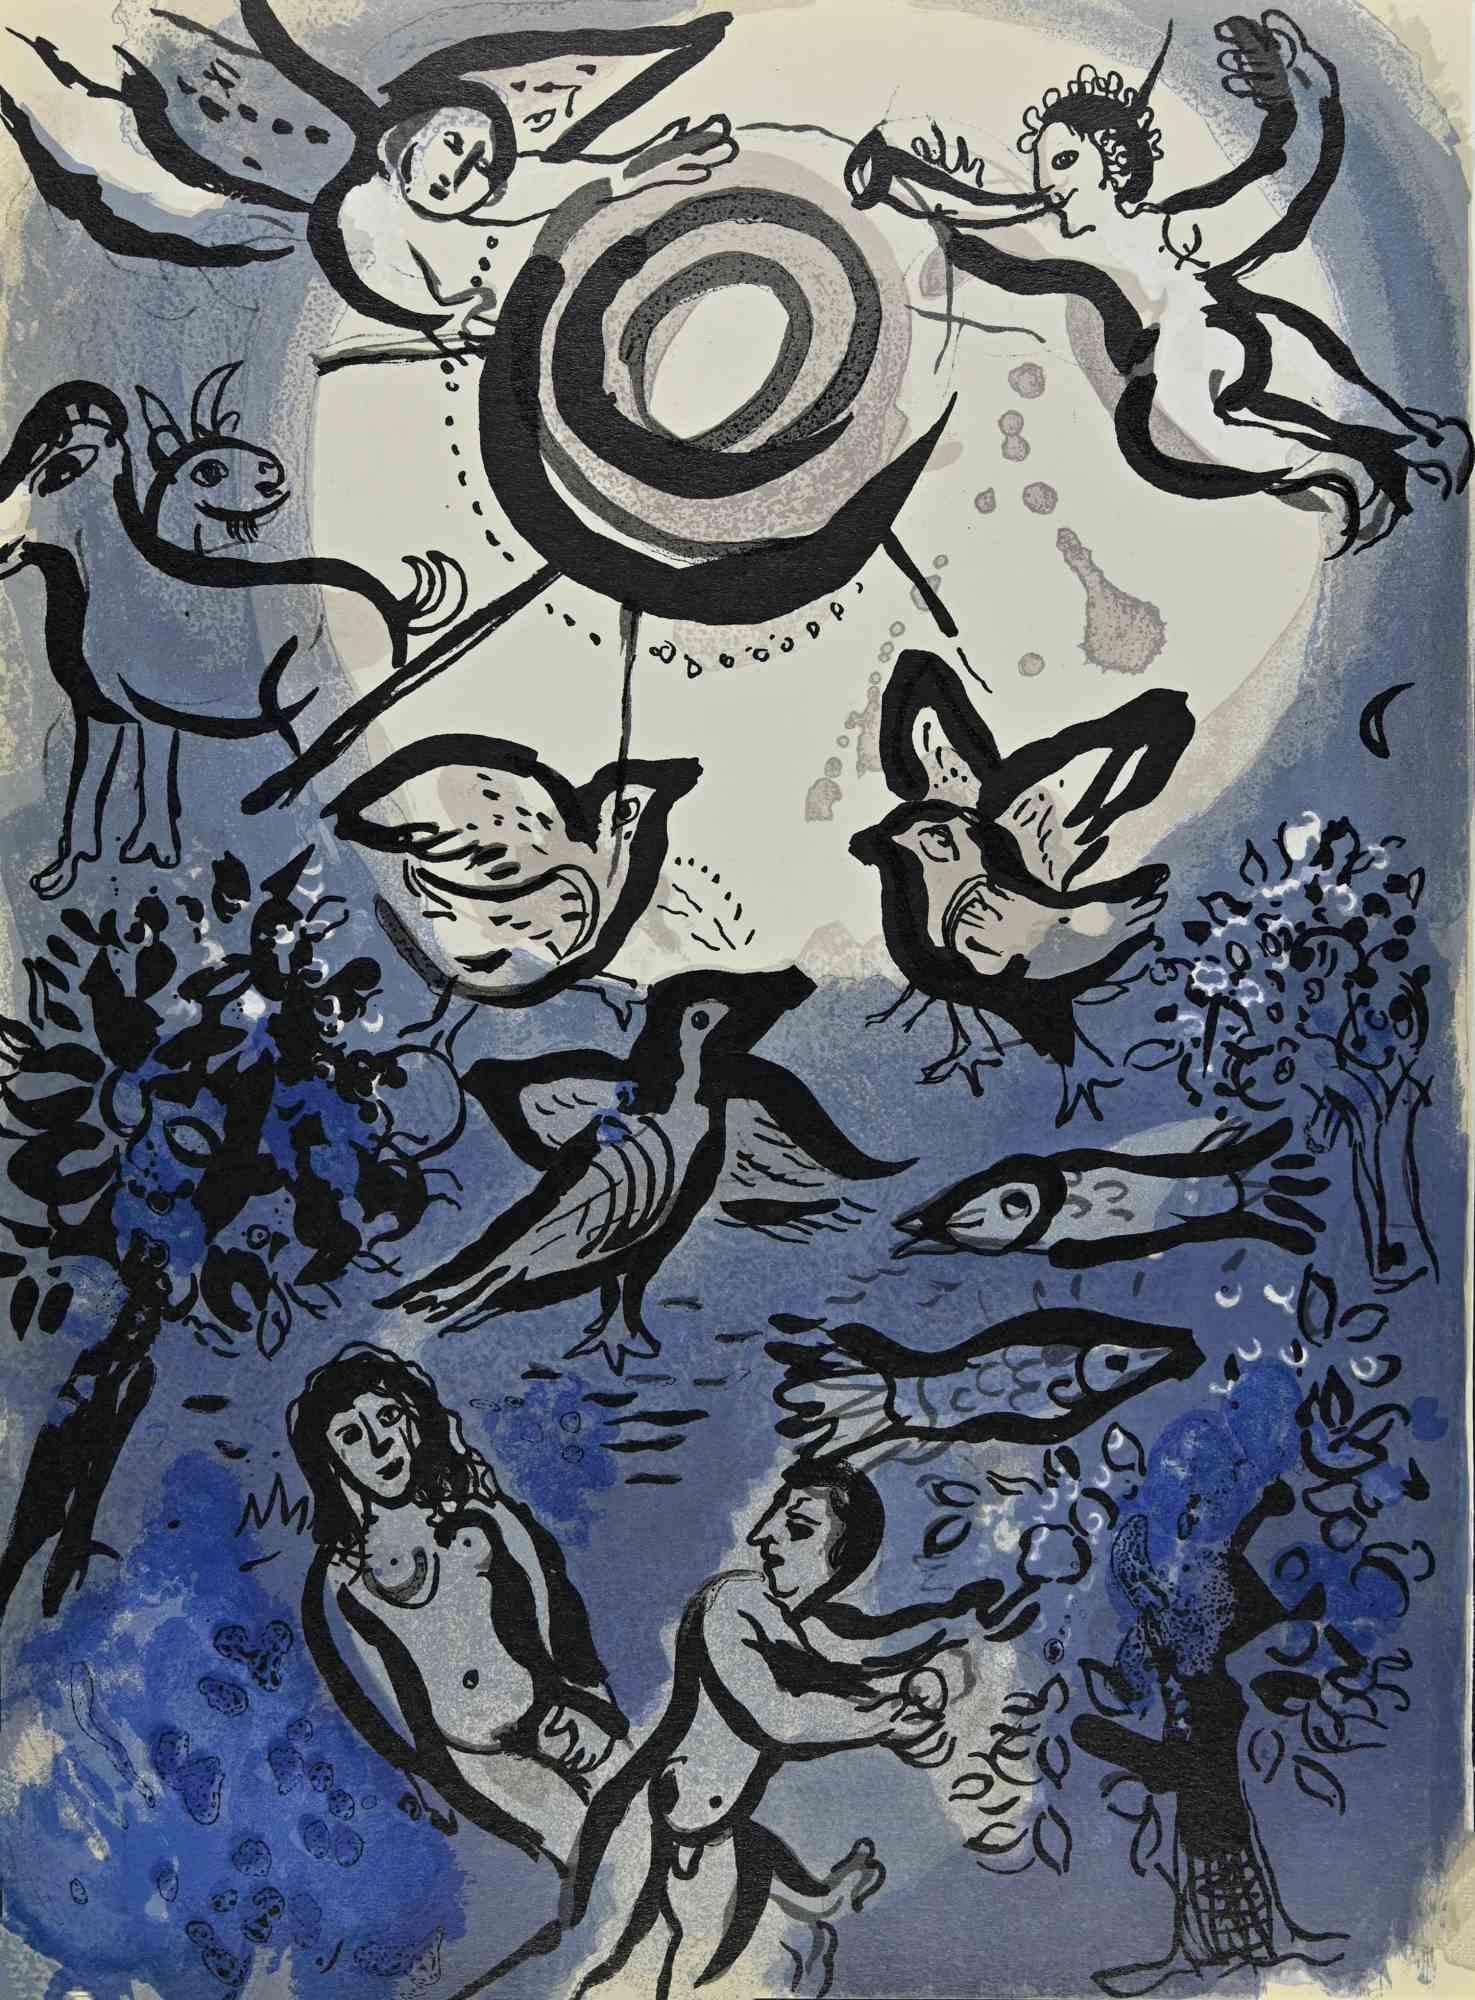 Adam and Eve  is a an artwork from the Series "The Bible", by Marc Chagall in 1960.

Mixed colored lithograph on brown-toned paper, no signature.

Edition of 6500 unsigned lithographs. Printed by Mourlot and published by Tériade, Paris.

Excellent